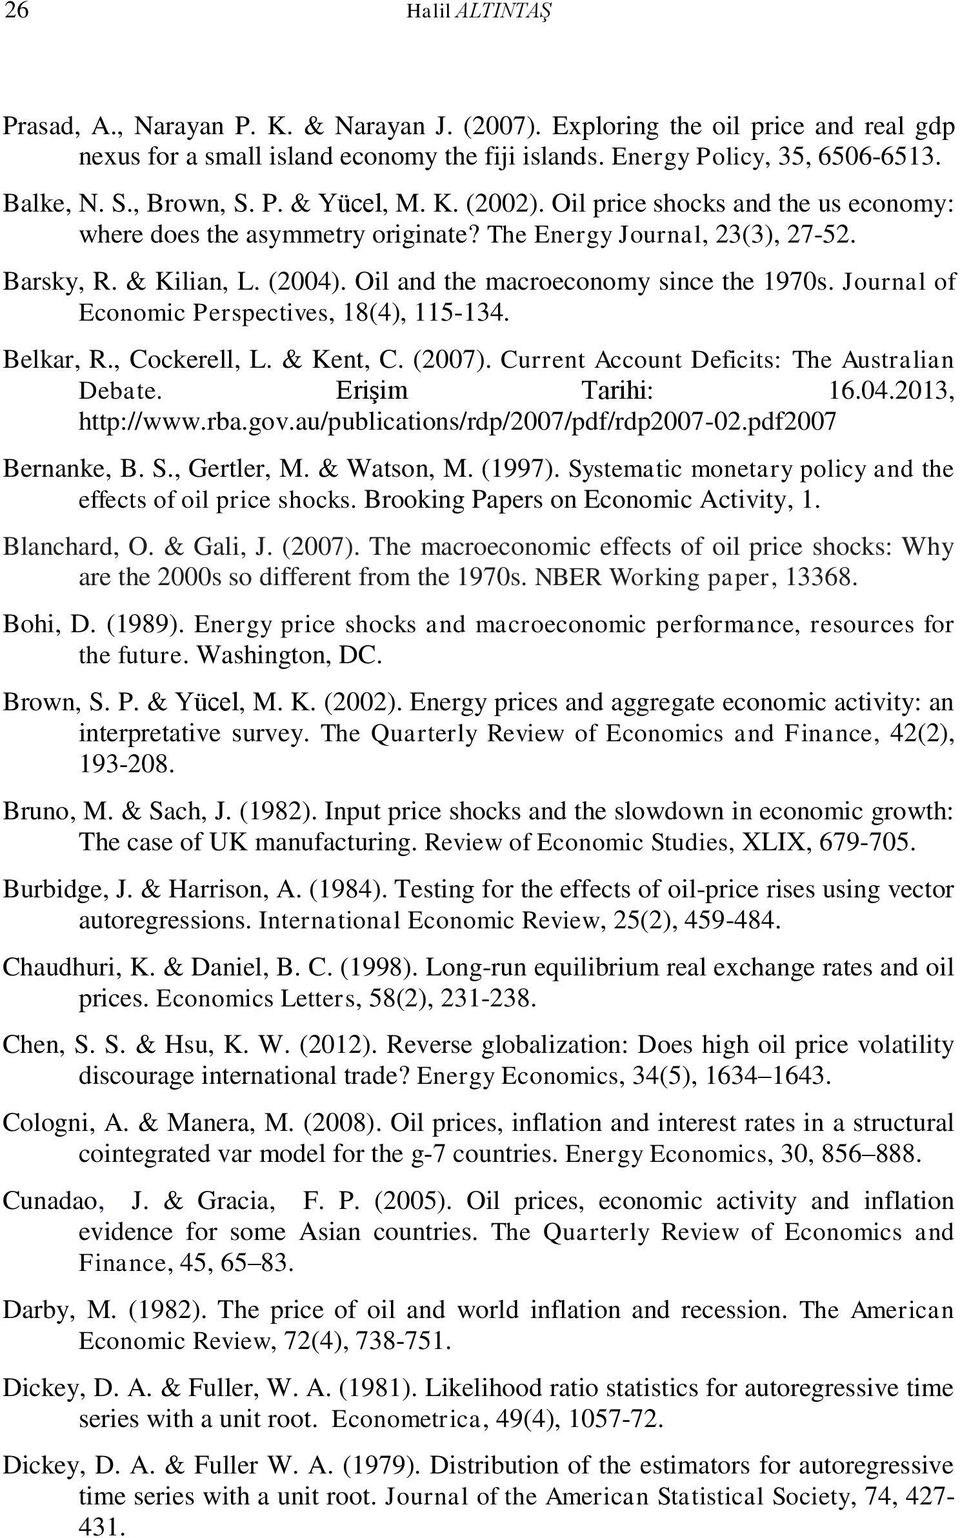 Oil and the macroeconomy since the 1970s. Journal of Economic Perspectives, 18(4), 115-134. Belkar, R., Cockerell, L. & Kent, C. (2007). Current Account Deficits: The Australian Debate.